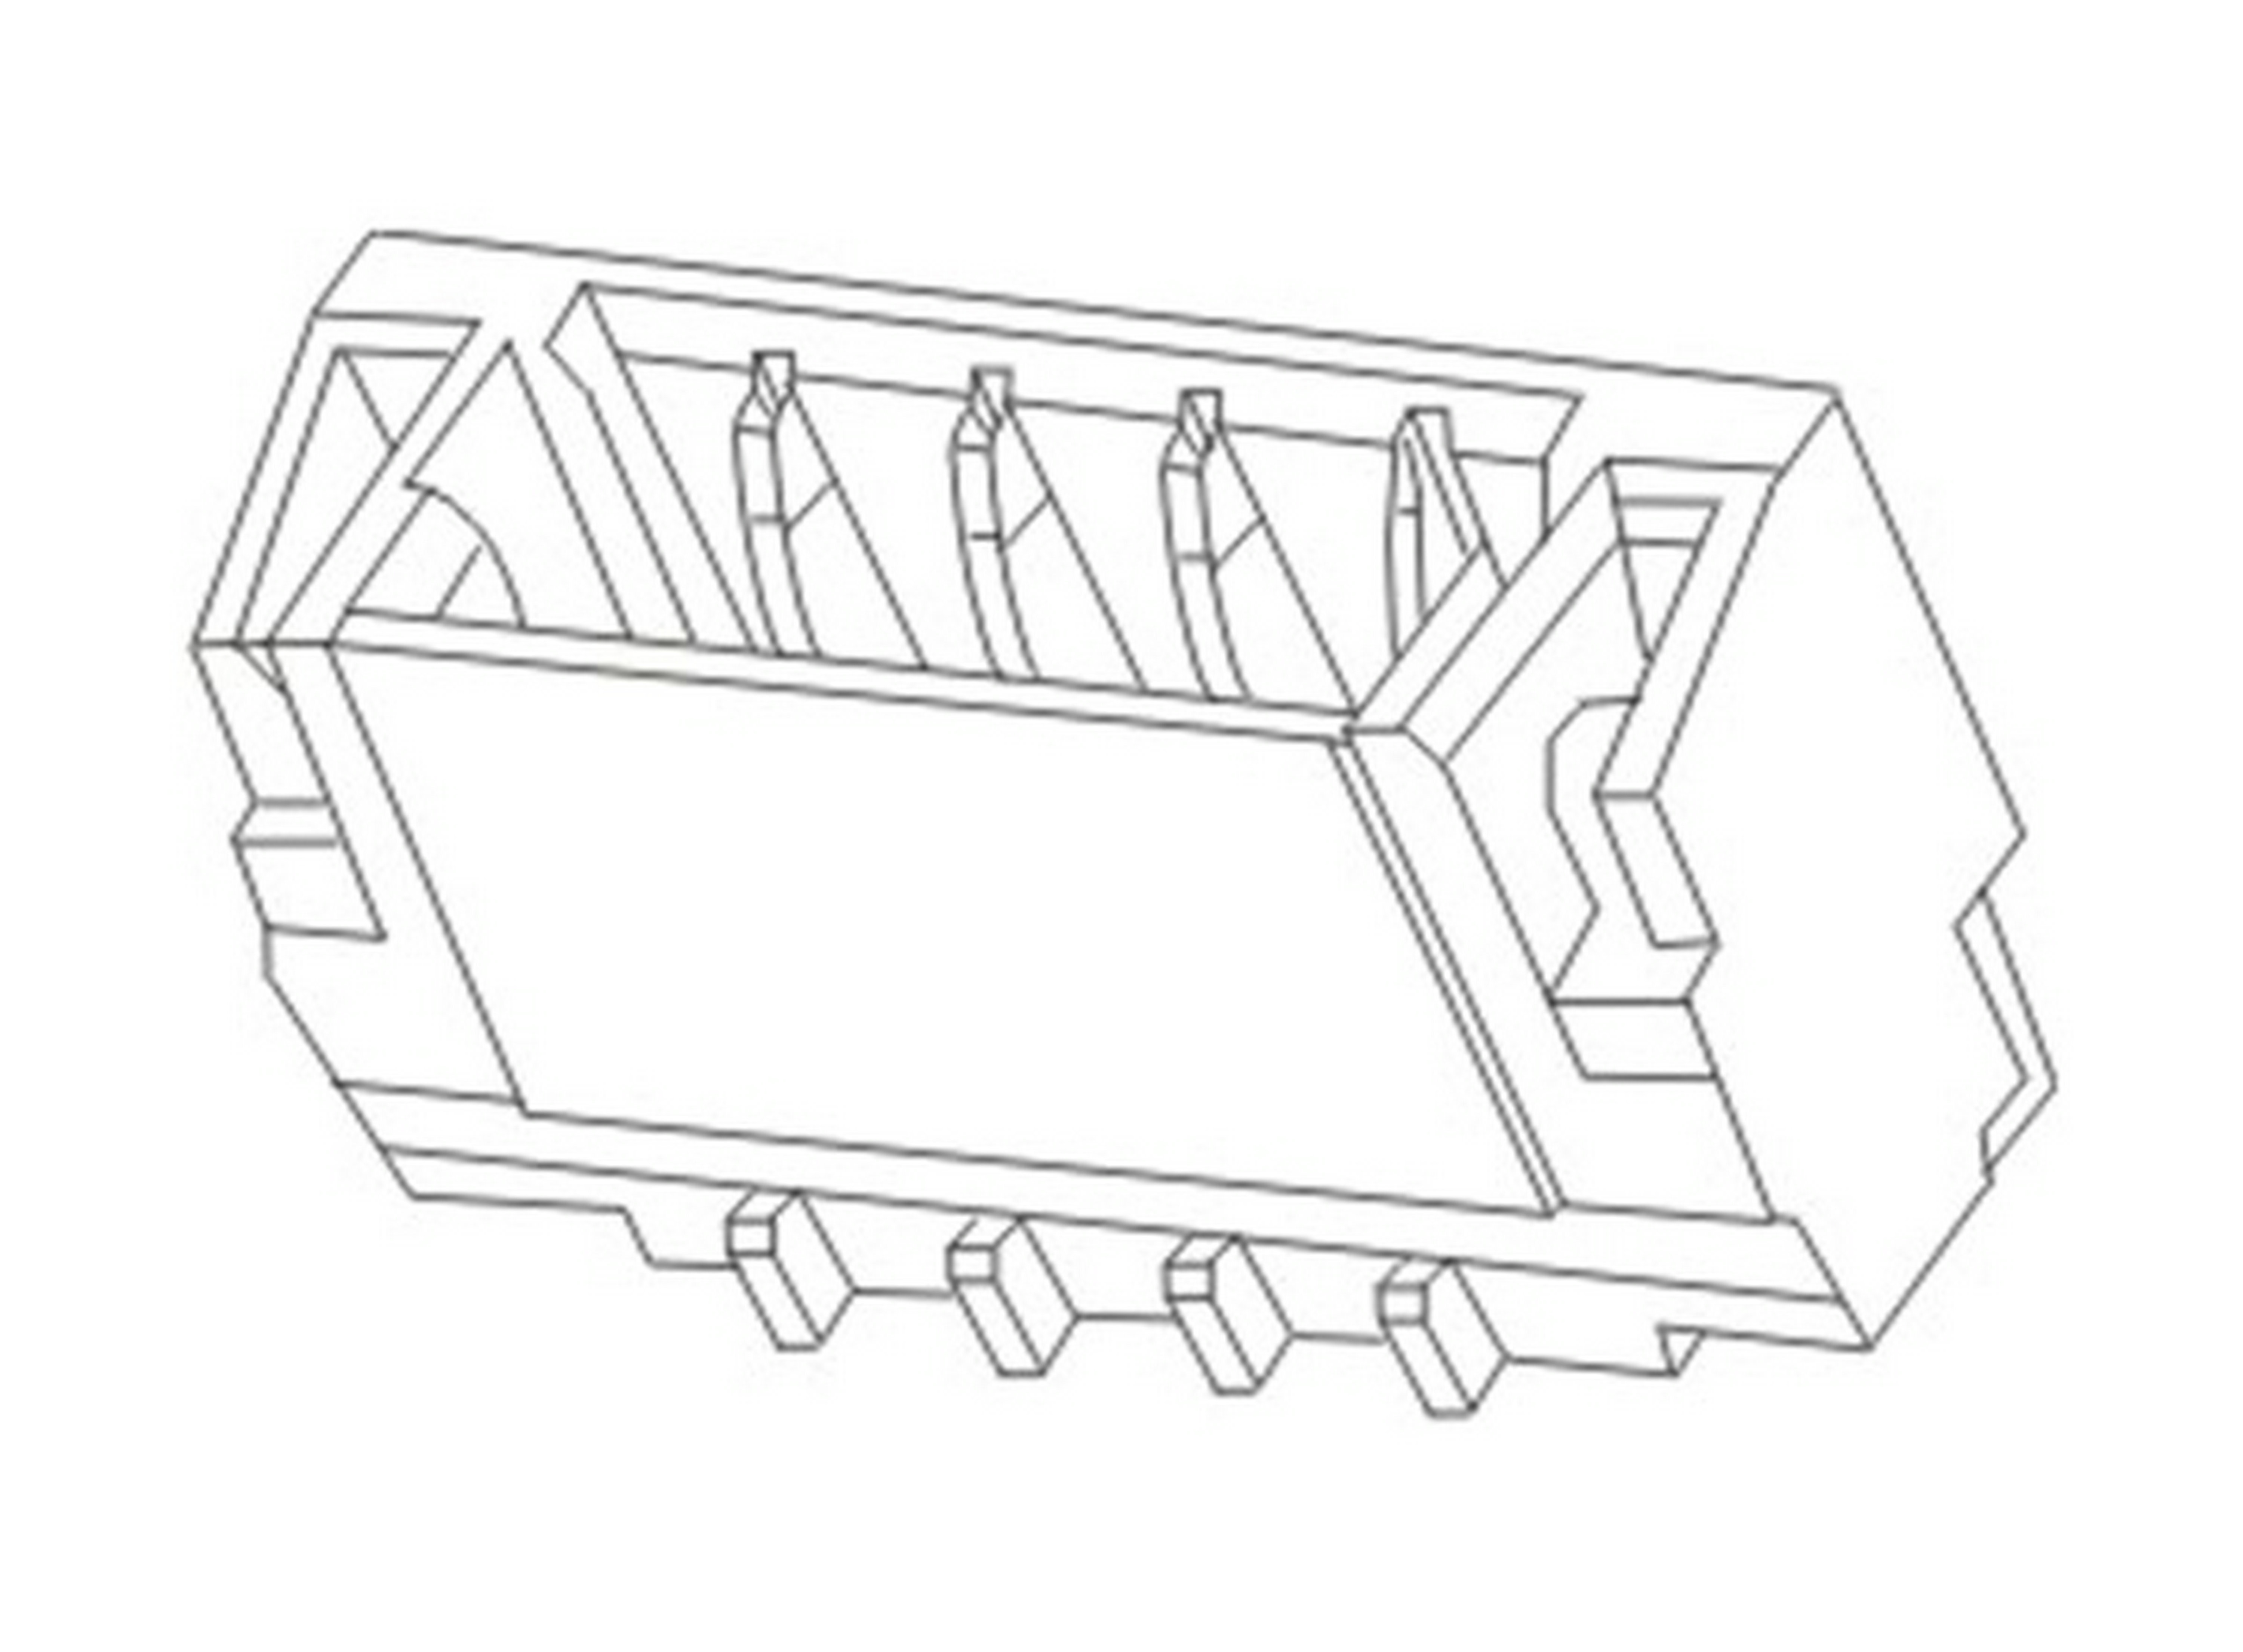 PH0.8mm wafer, single row, vertical SMT type wafer connectors